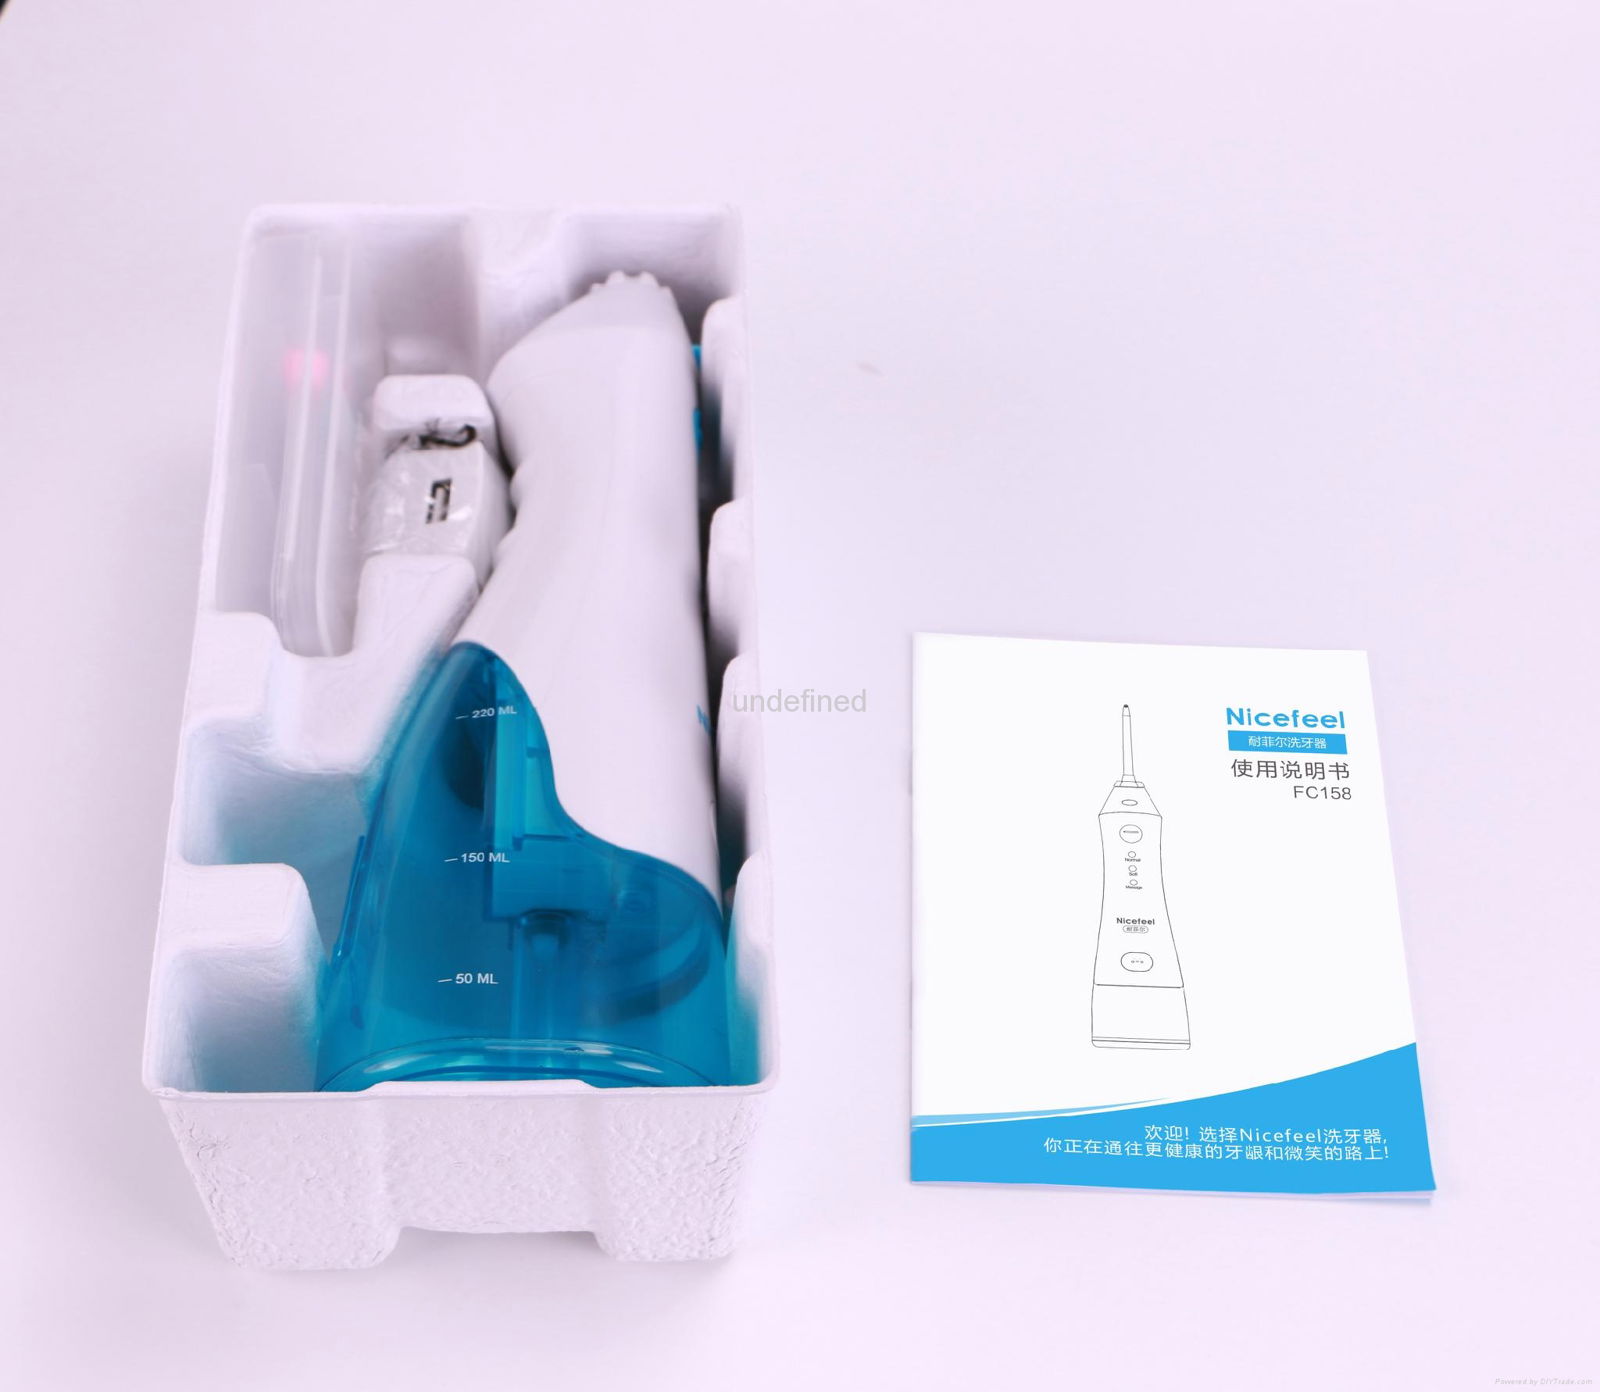 Nicefeel German designelectric tooth brush by manufactery 5